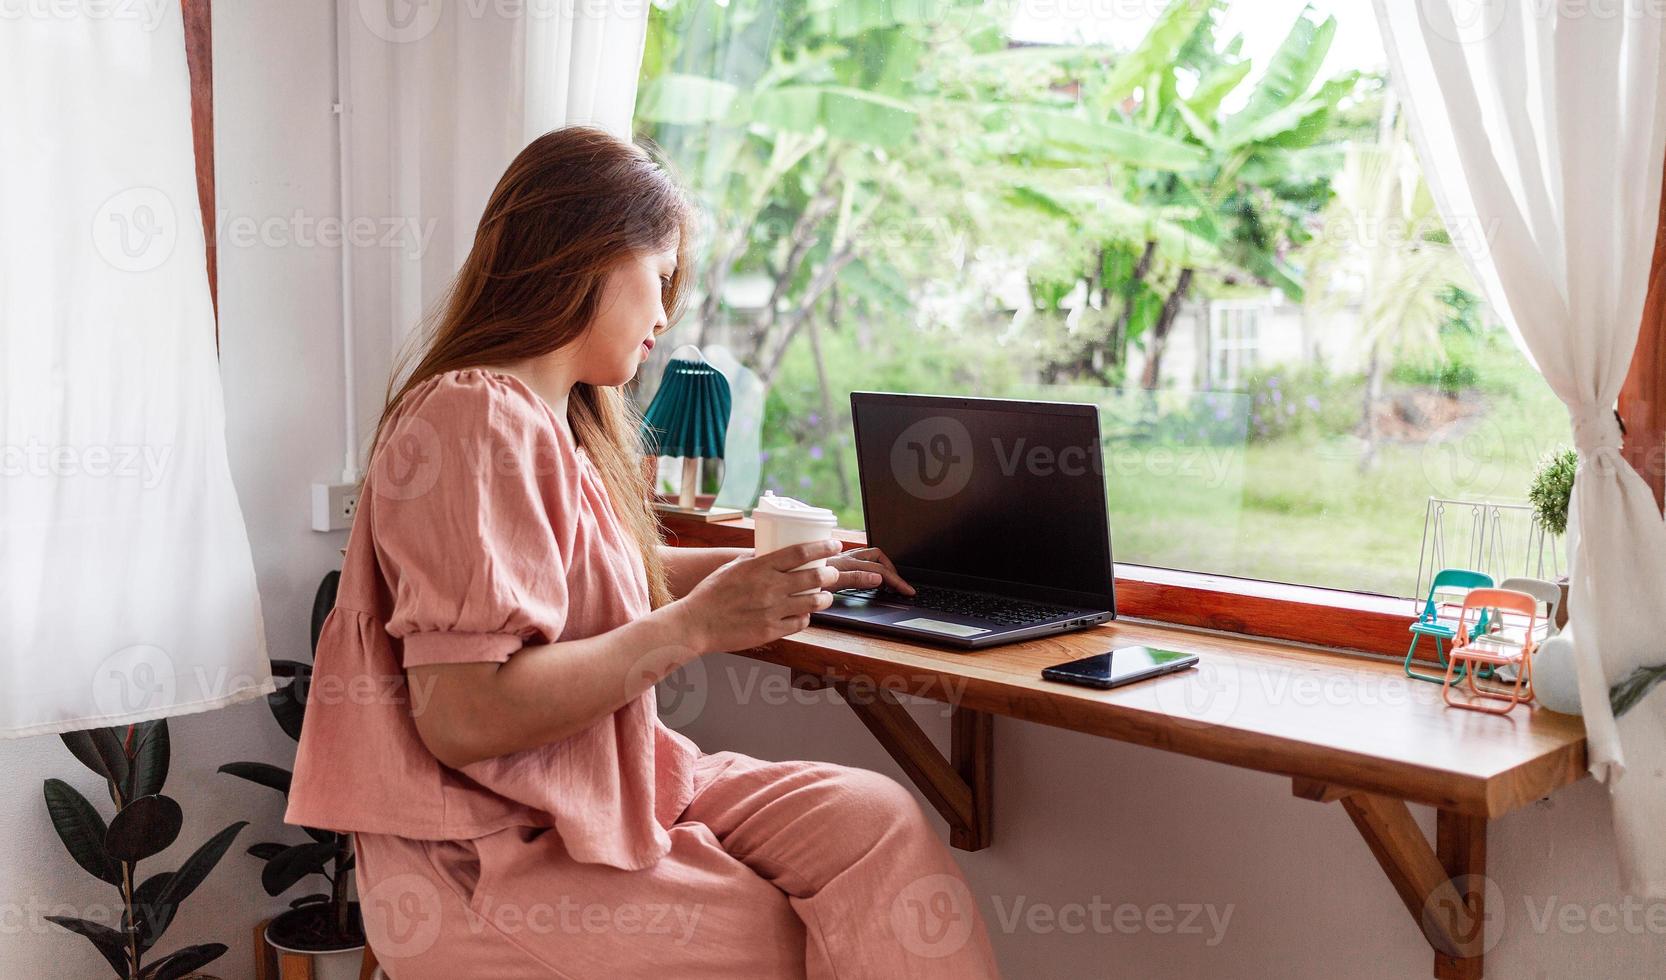 A happy  female at a cafe using a laptop in hand and a paper cup of coffee. young white woman with long hair sitting in a coffee shop busy working on her laptop. photo